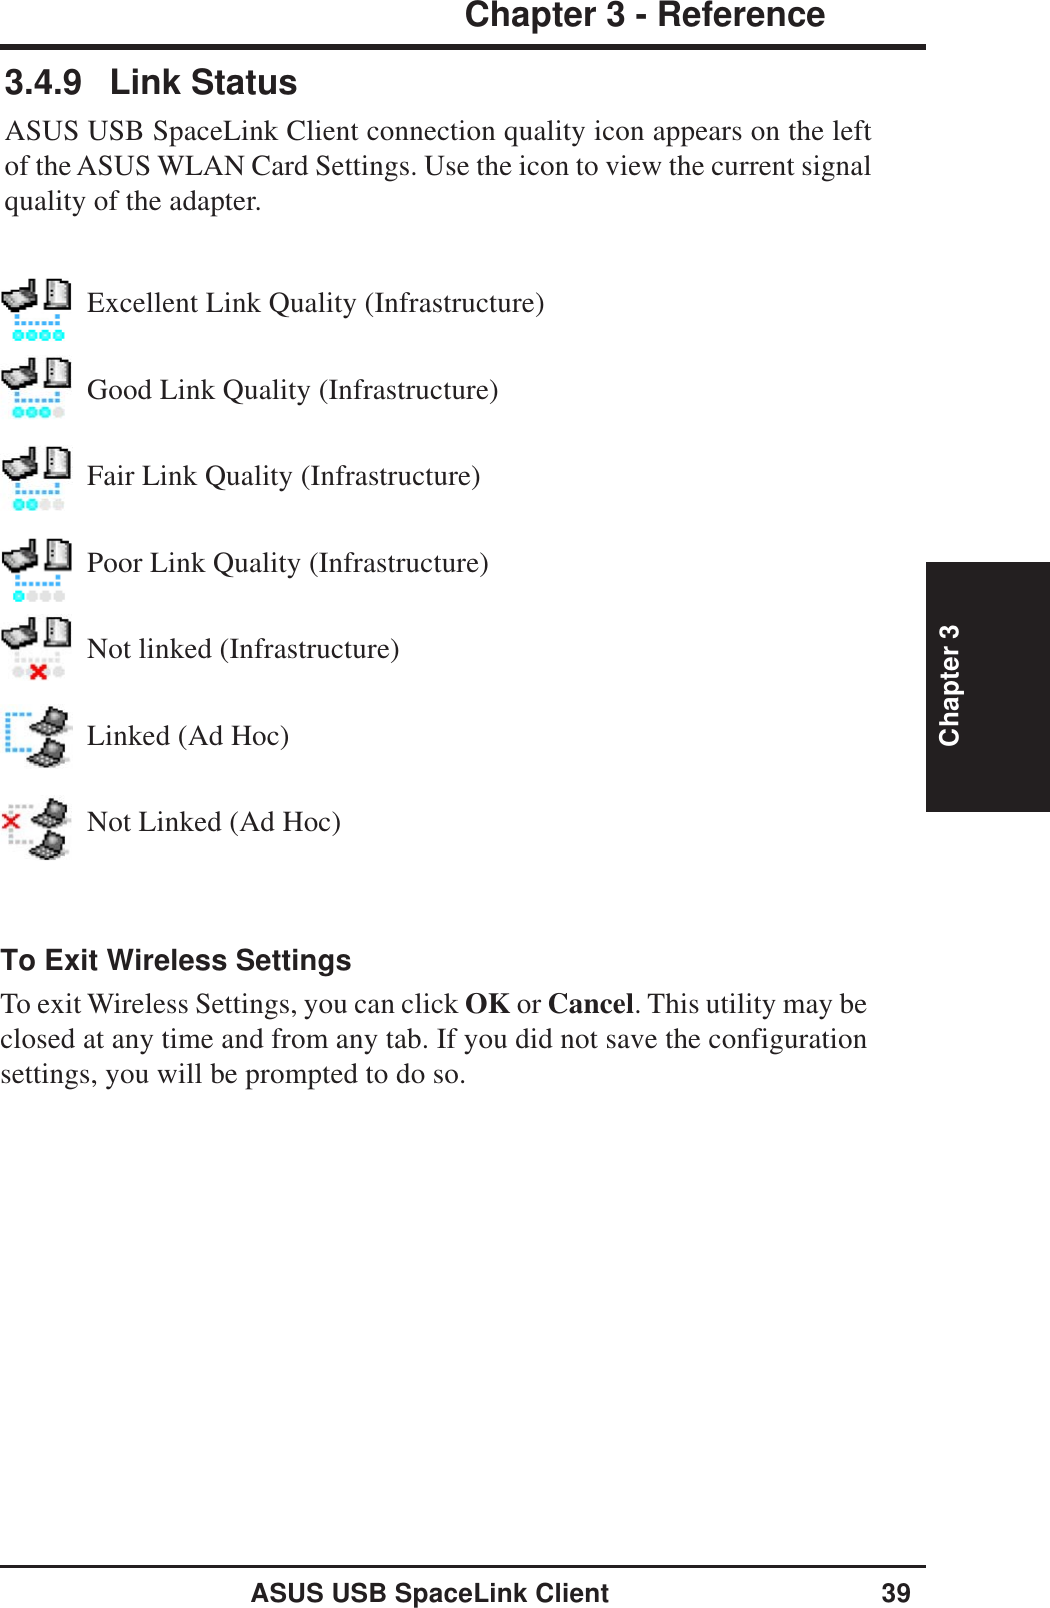 ASUS USB SpaceLink Client 39Chapter 3 - ReferenceChapter 3To Exit Wireless SettingsTo exit Wireless Settings, you can click OK or Cancel. This utility may beclosed at any time and from any tab. If you did not save the configurationsettings, you will be prompted to do so.3.4.9 Link StatusASUS USB SpaceLink Client connection quality icon appears on the leftof the ASUS WLAN Card Settings. Use the icon to view the current signalquality of the adapter.Excellent Link Quality (Infrastructure)Good Link Quality (Infrastructure)Fair Link Quality (Infrastructure)Poor Link Quality (Infrastructure)Not linked (Infrastructure)Linked (Ad Hoc)Not Linked (Ad Hoc)